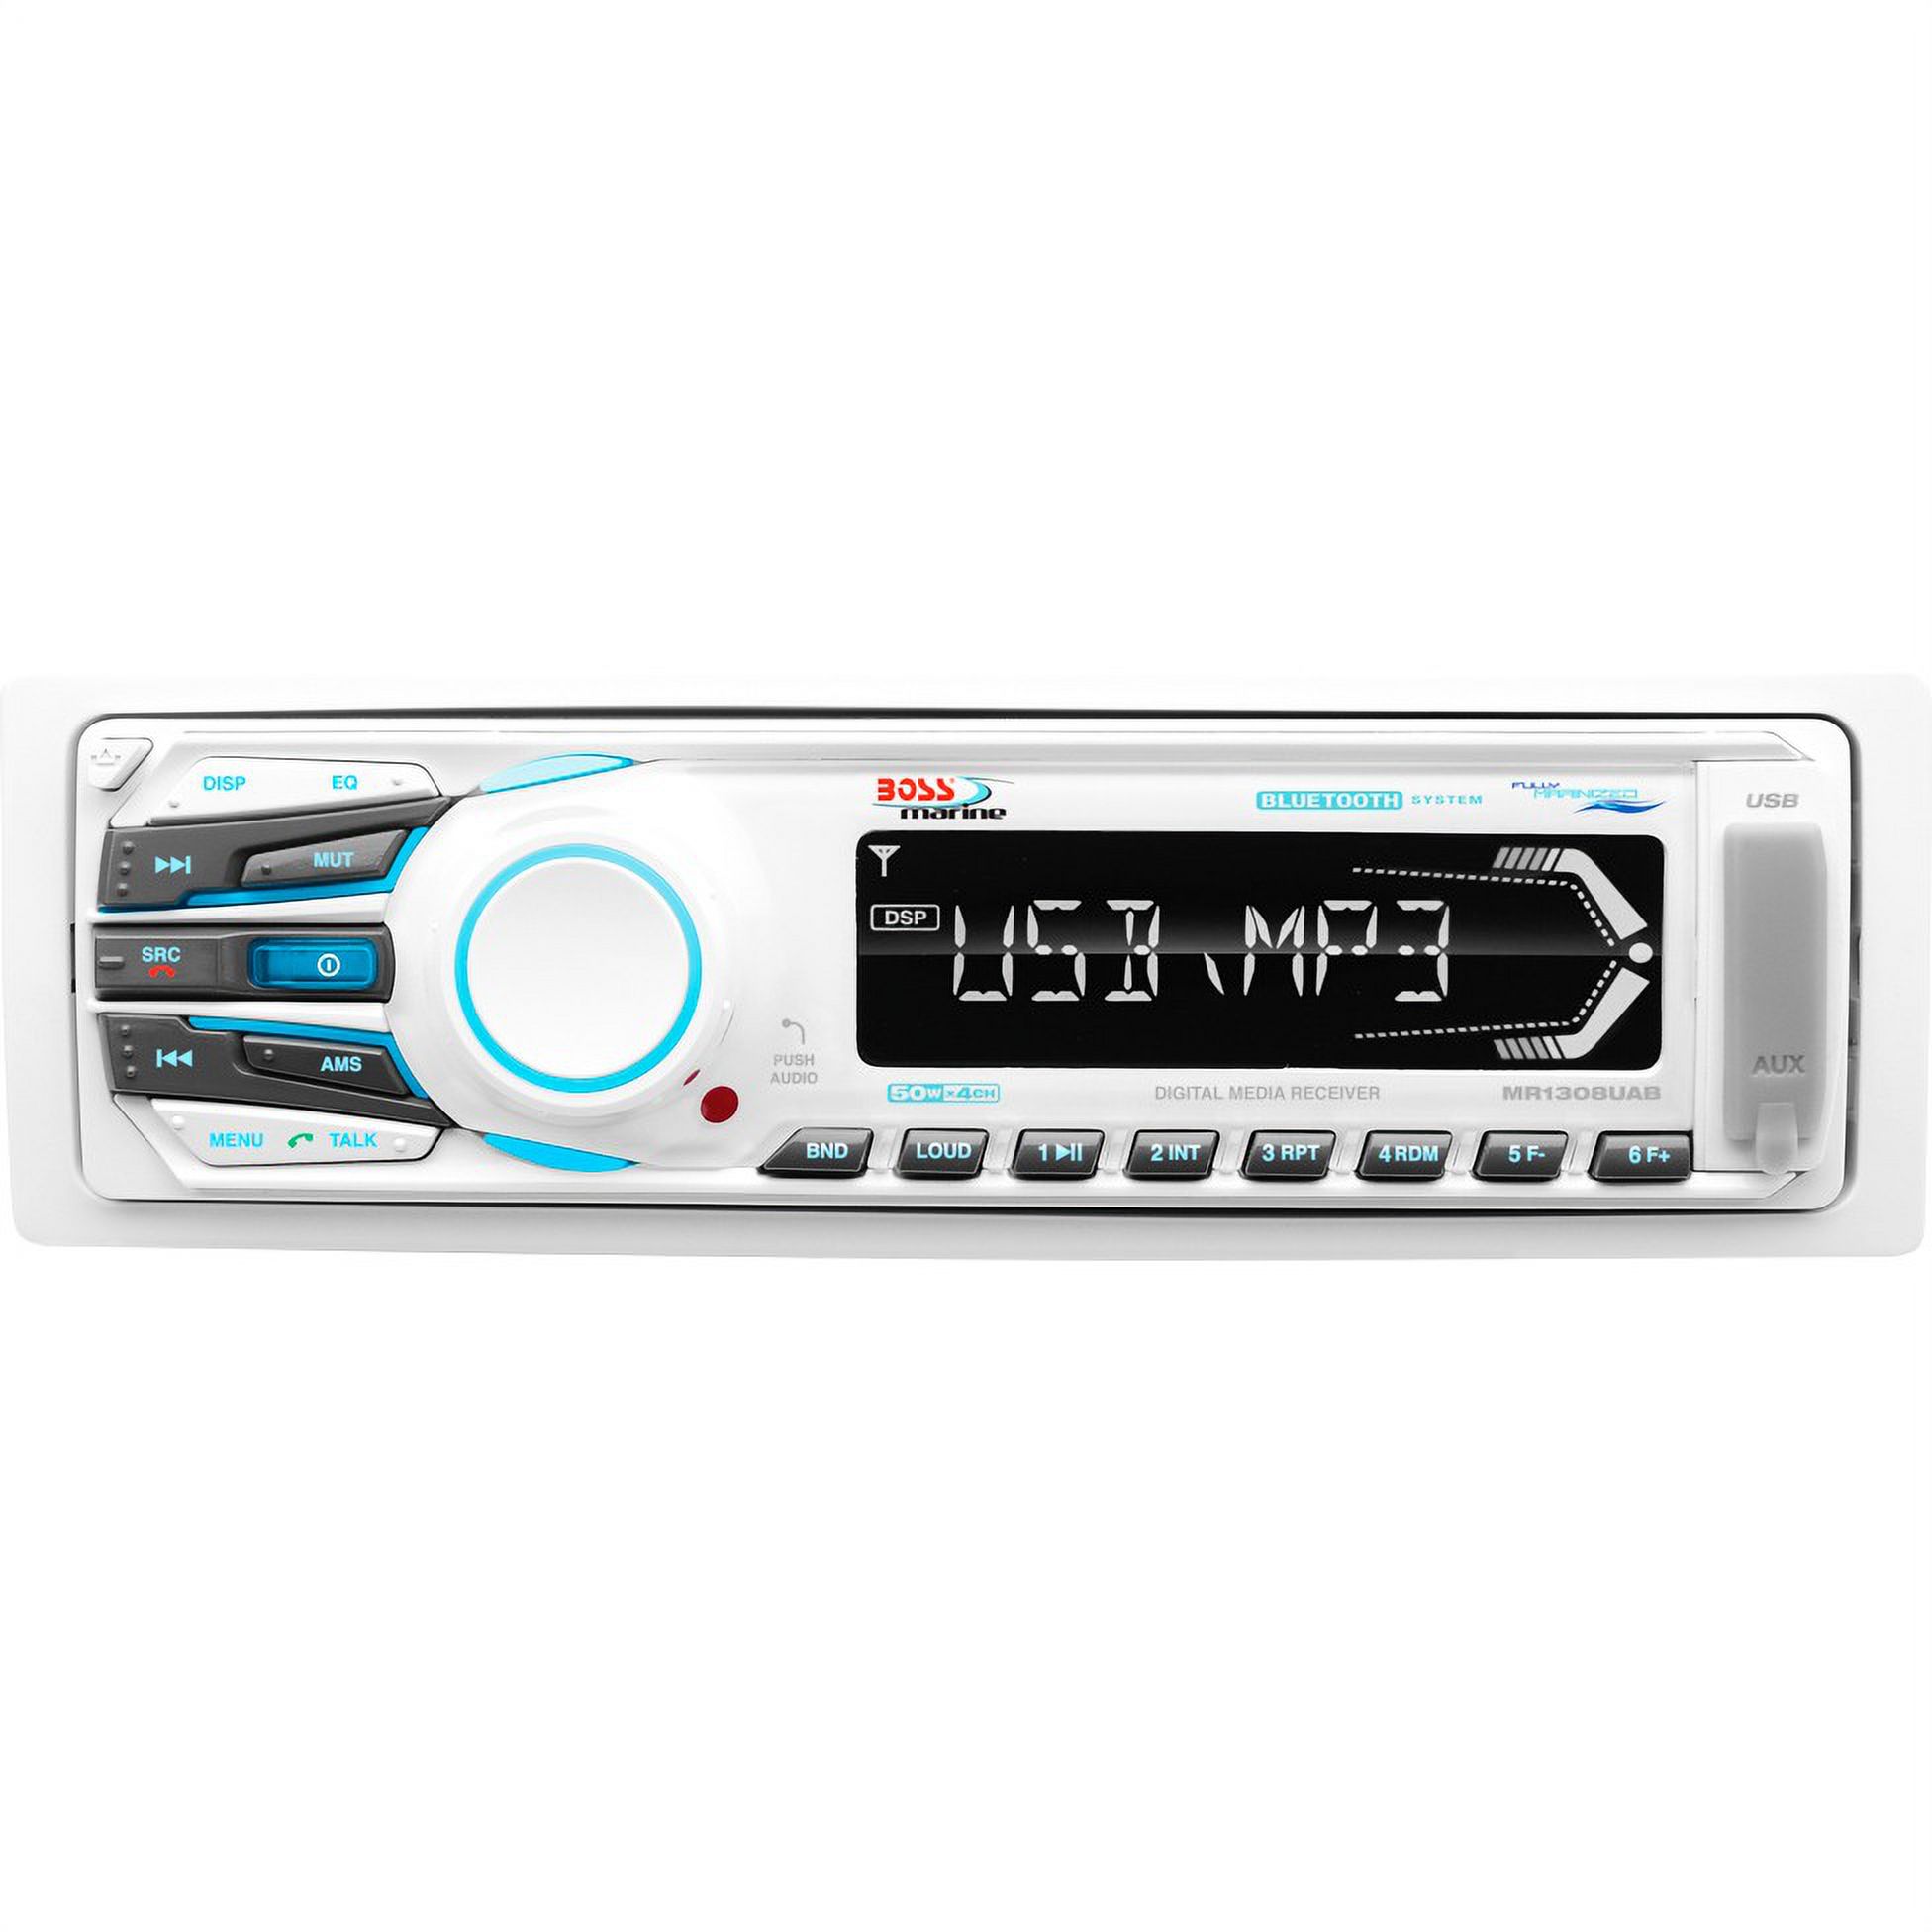 Boss Audio System Single DIN AM, FM, CD Receiver with 6.5 In. Marine Speakers and Antenna, White, Boat Accessories - image 5 of 9